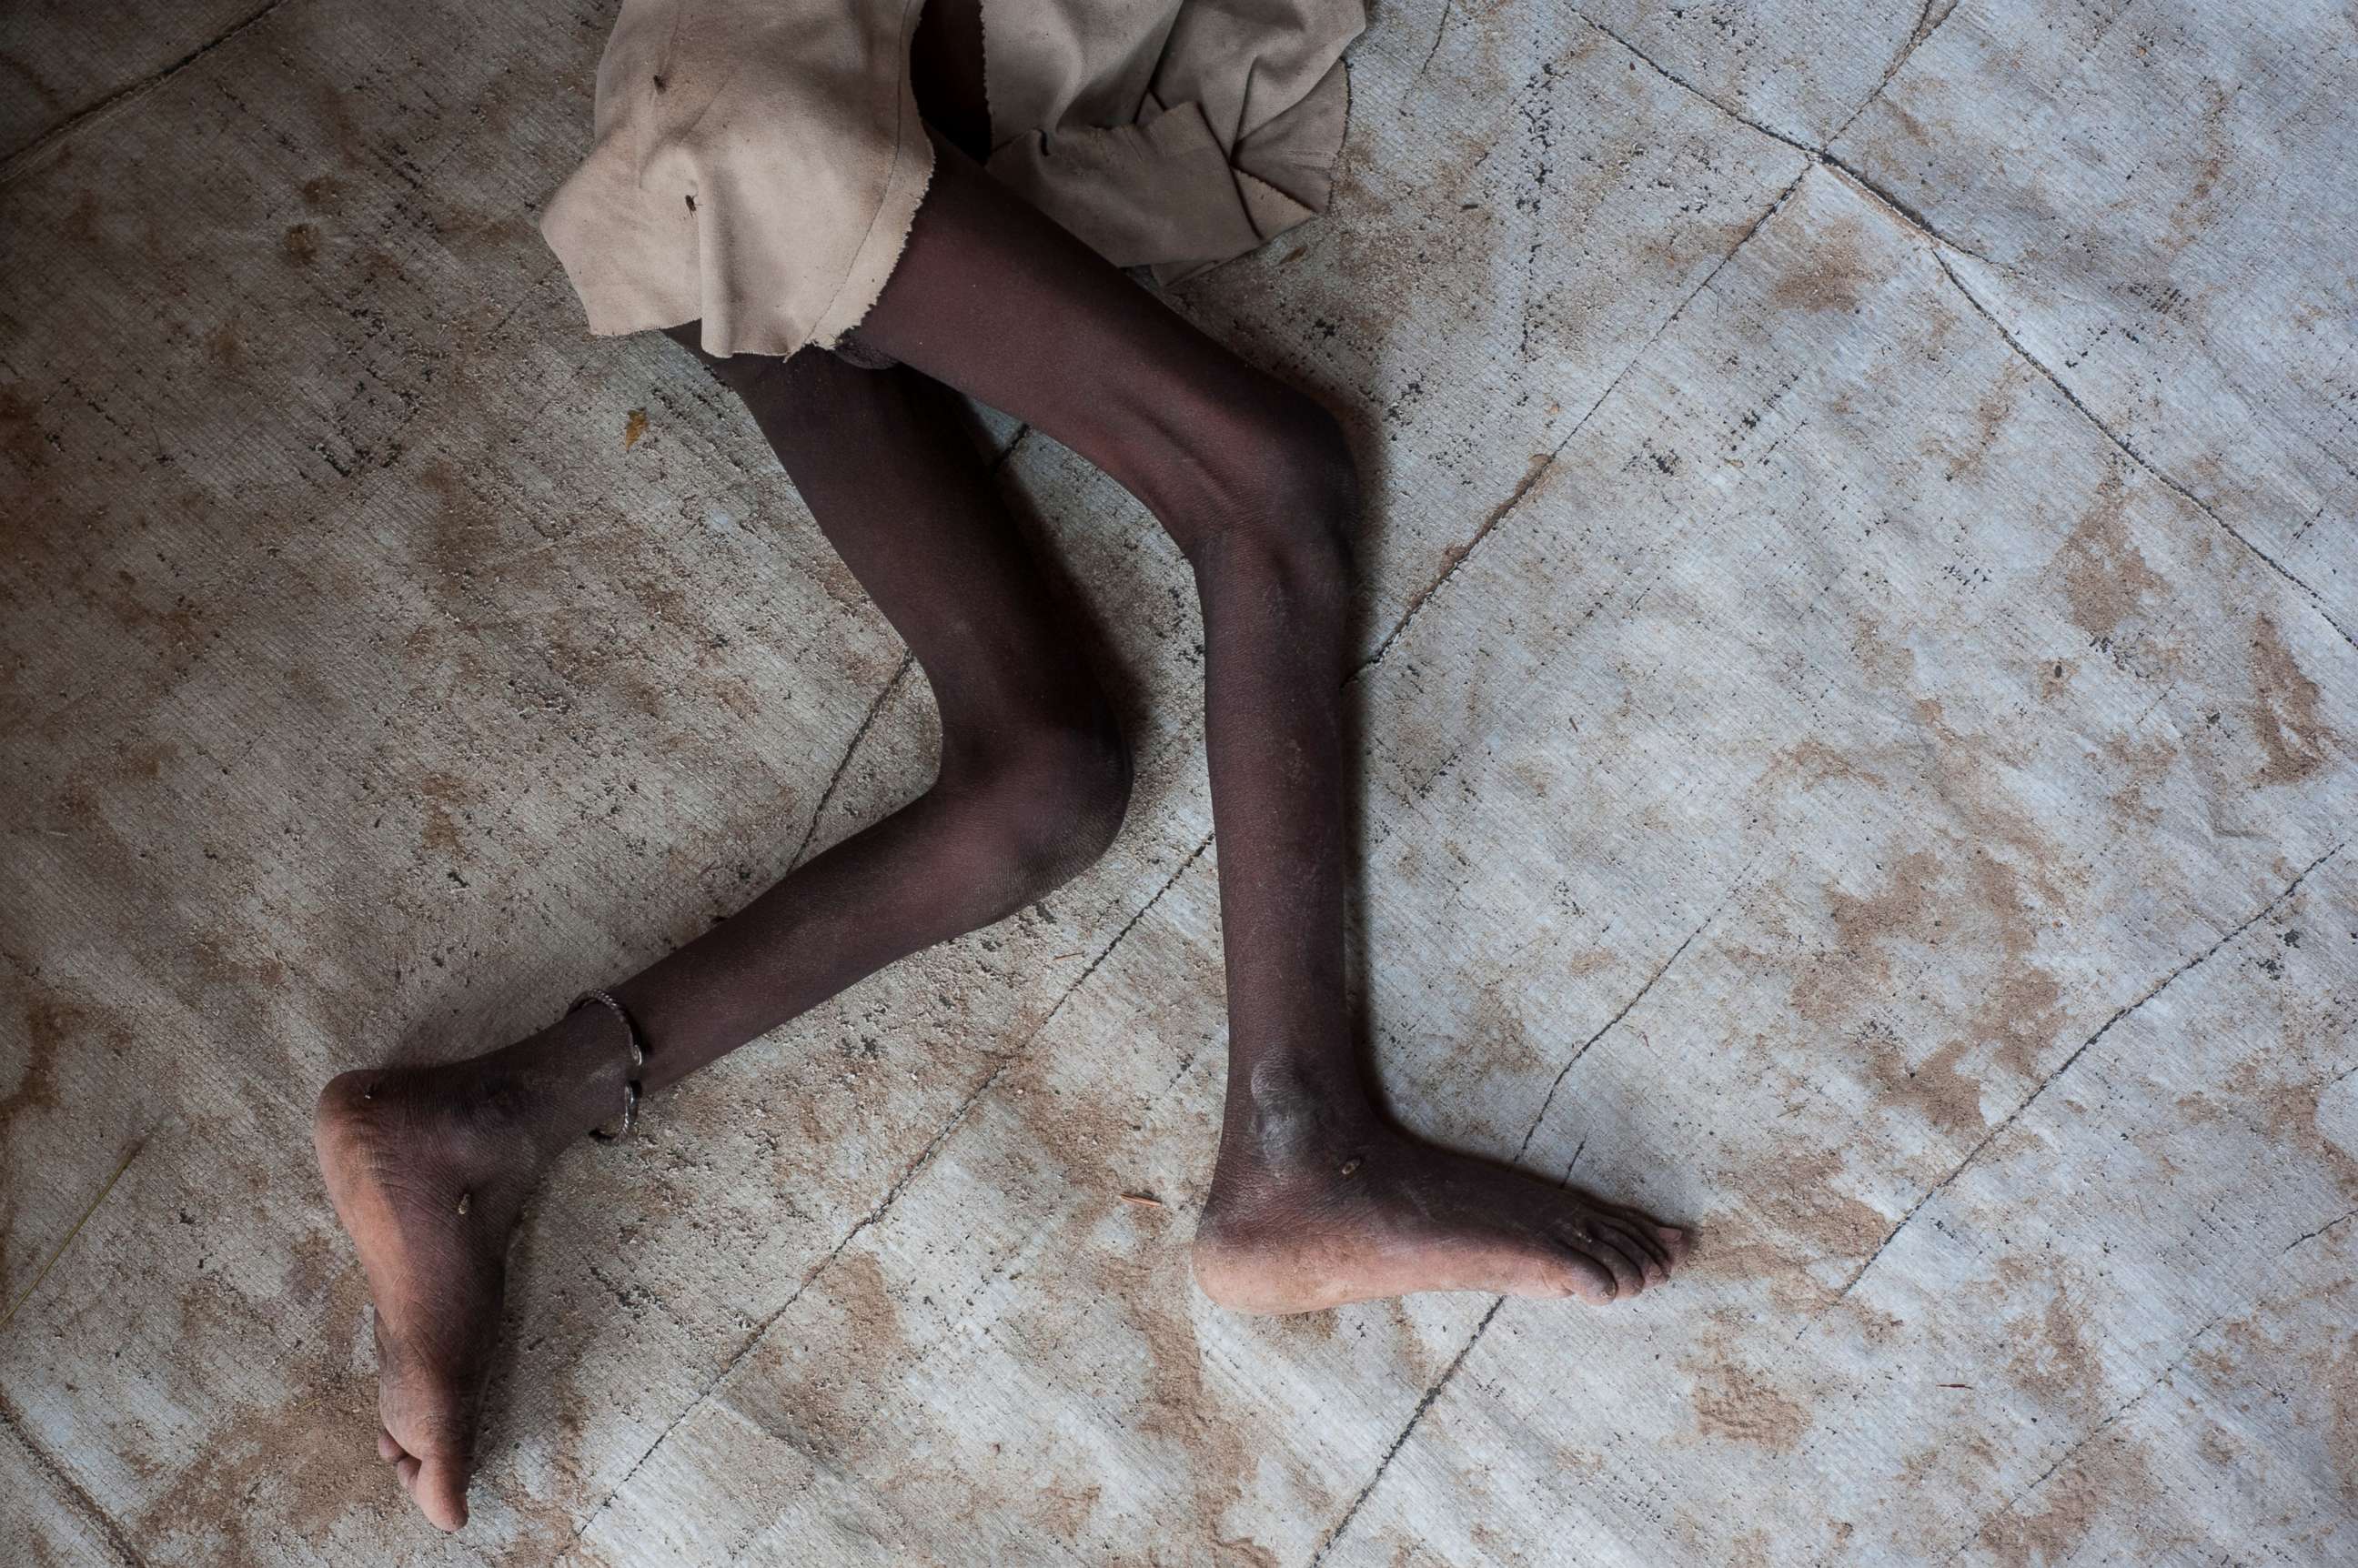 PHOTO: A young boy suffering from severe acute malnutrition lies in the Muna informal settlement, which houses nearly 16,000 IDPs (internally displaced people), in the outskirts of Maiduguri capital of Borno State, northeastern Nigeria, June 30, 2016. 